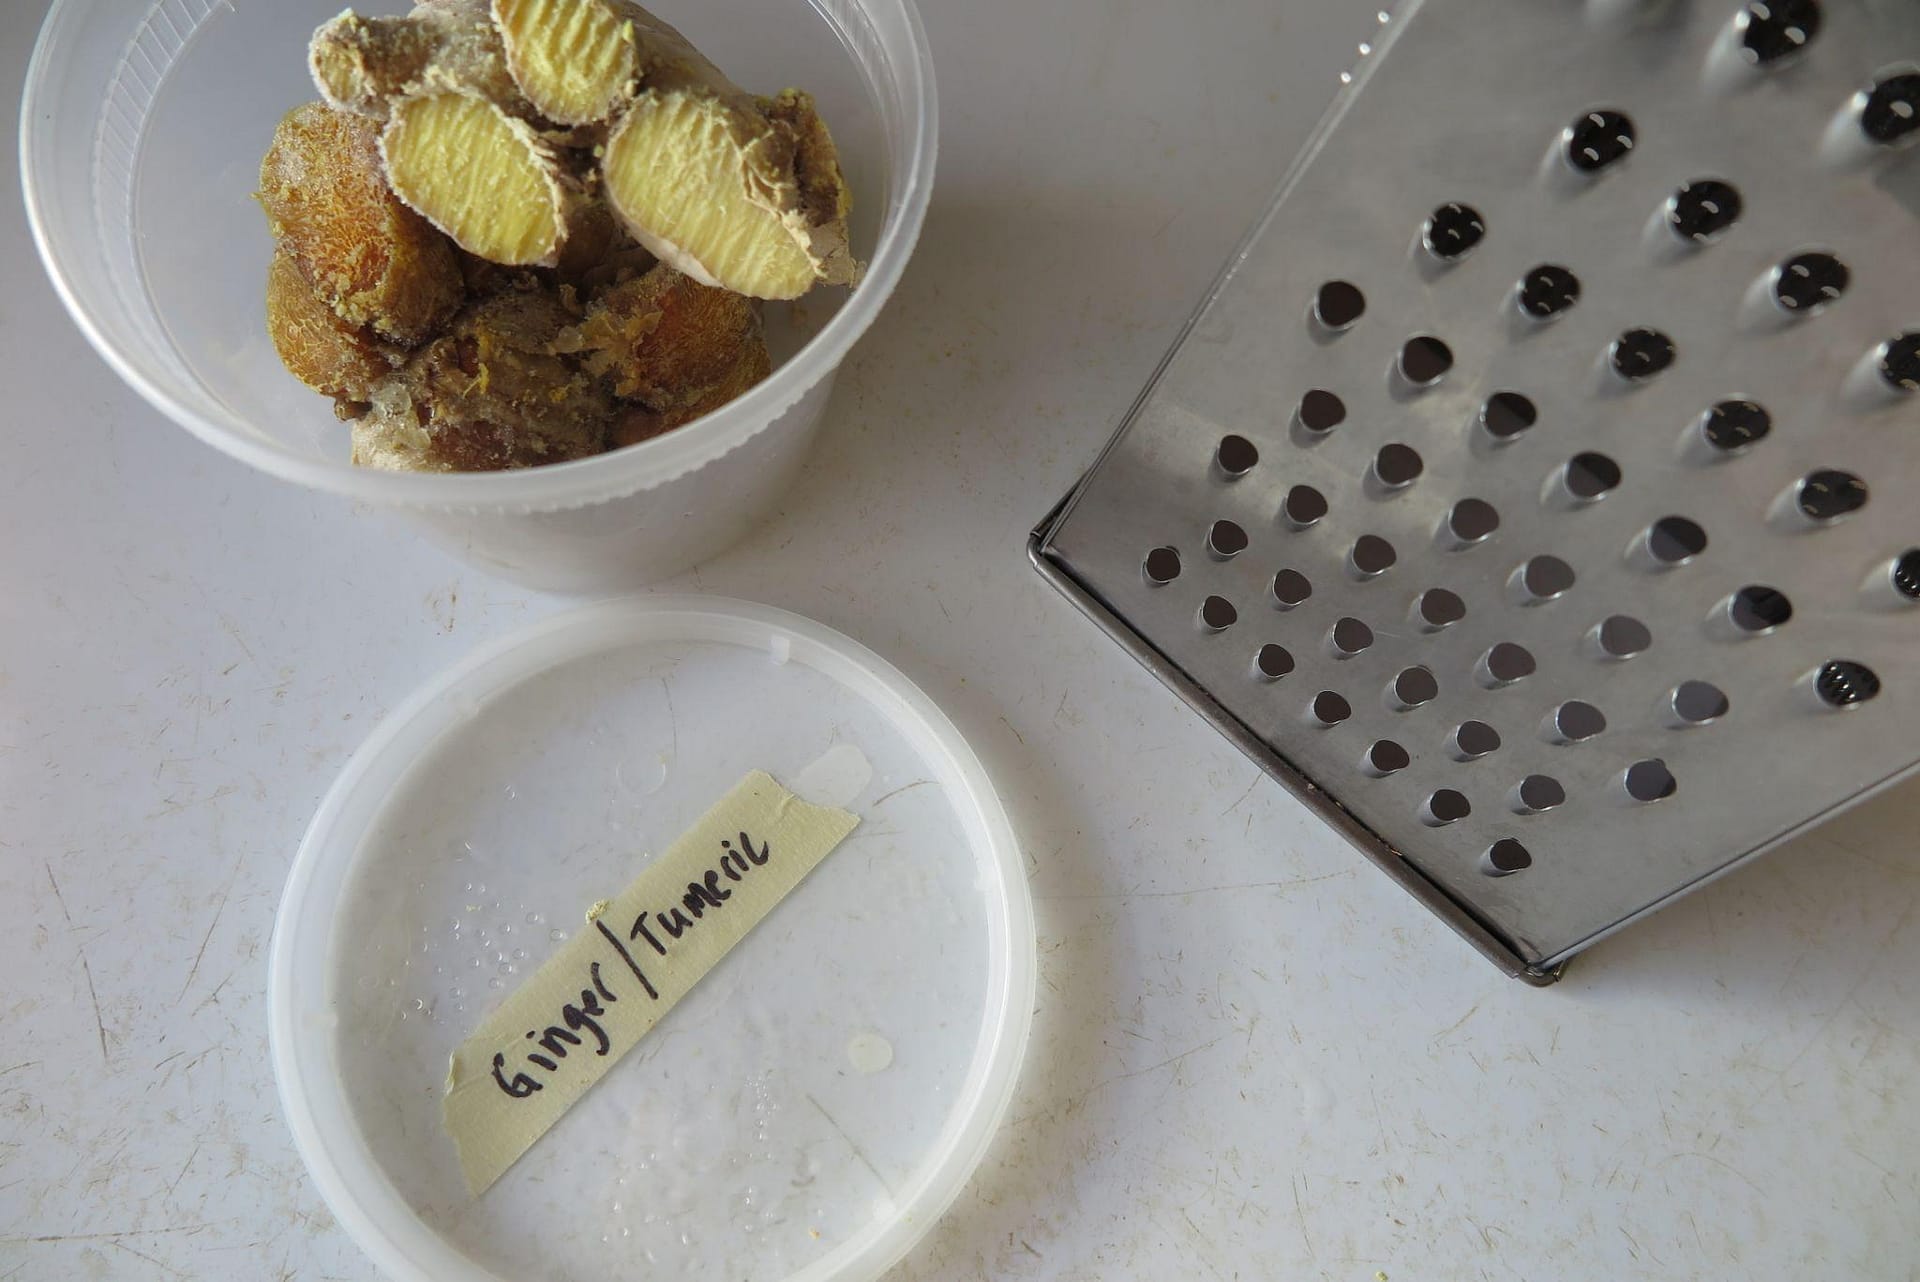 A plastic container of ginger root sitting on a white counter next to a box grater